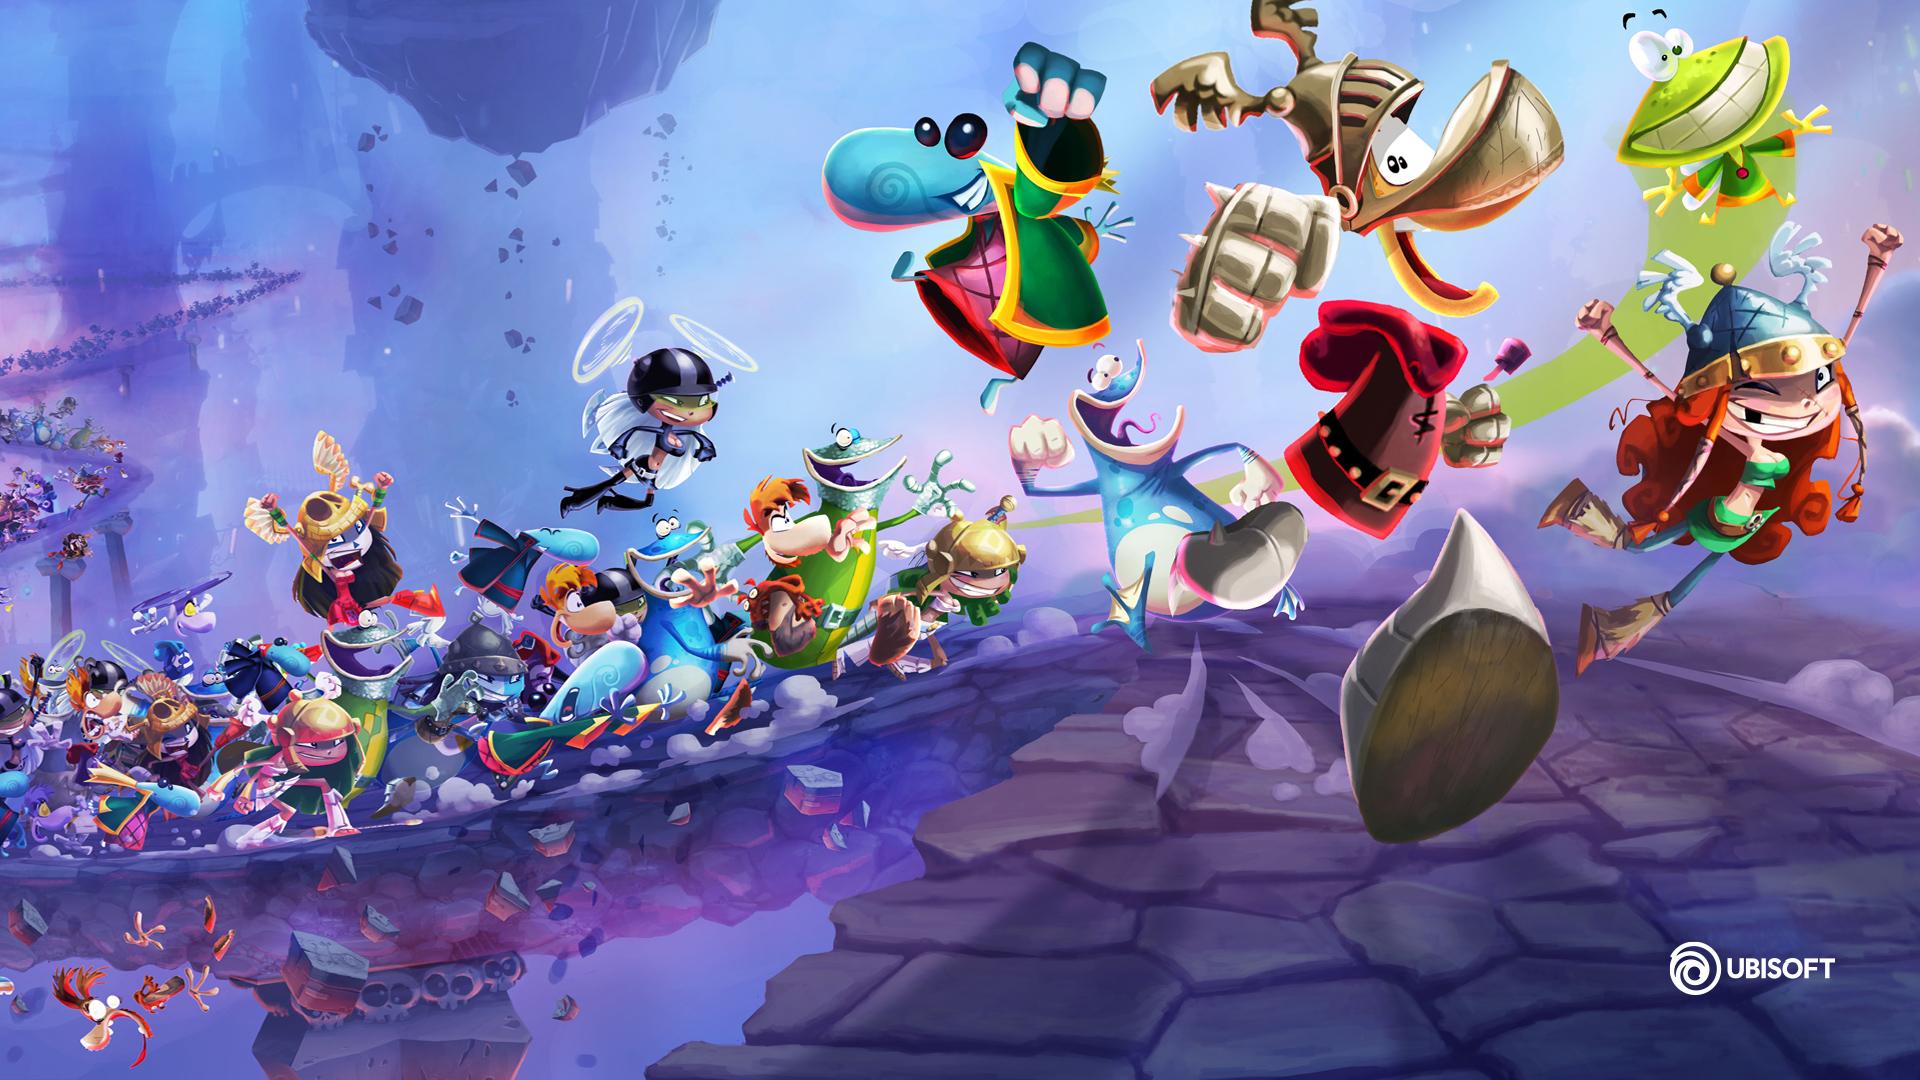 HD wallpaper, Video Games, Colorful, Ubisoft, Rayman, Video Game Art